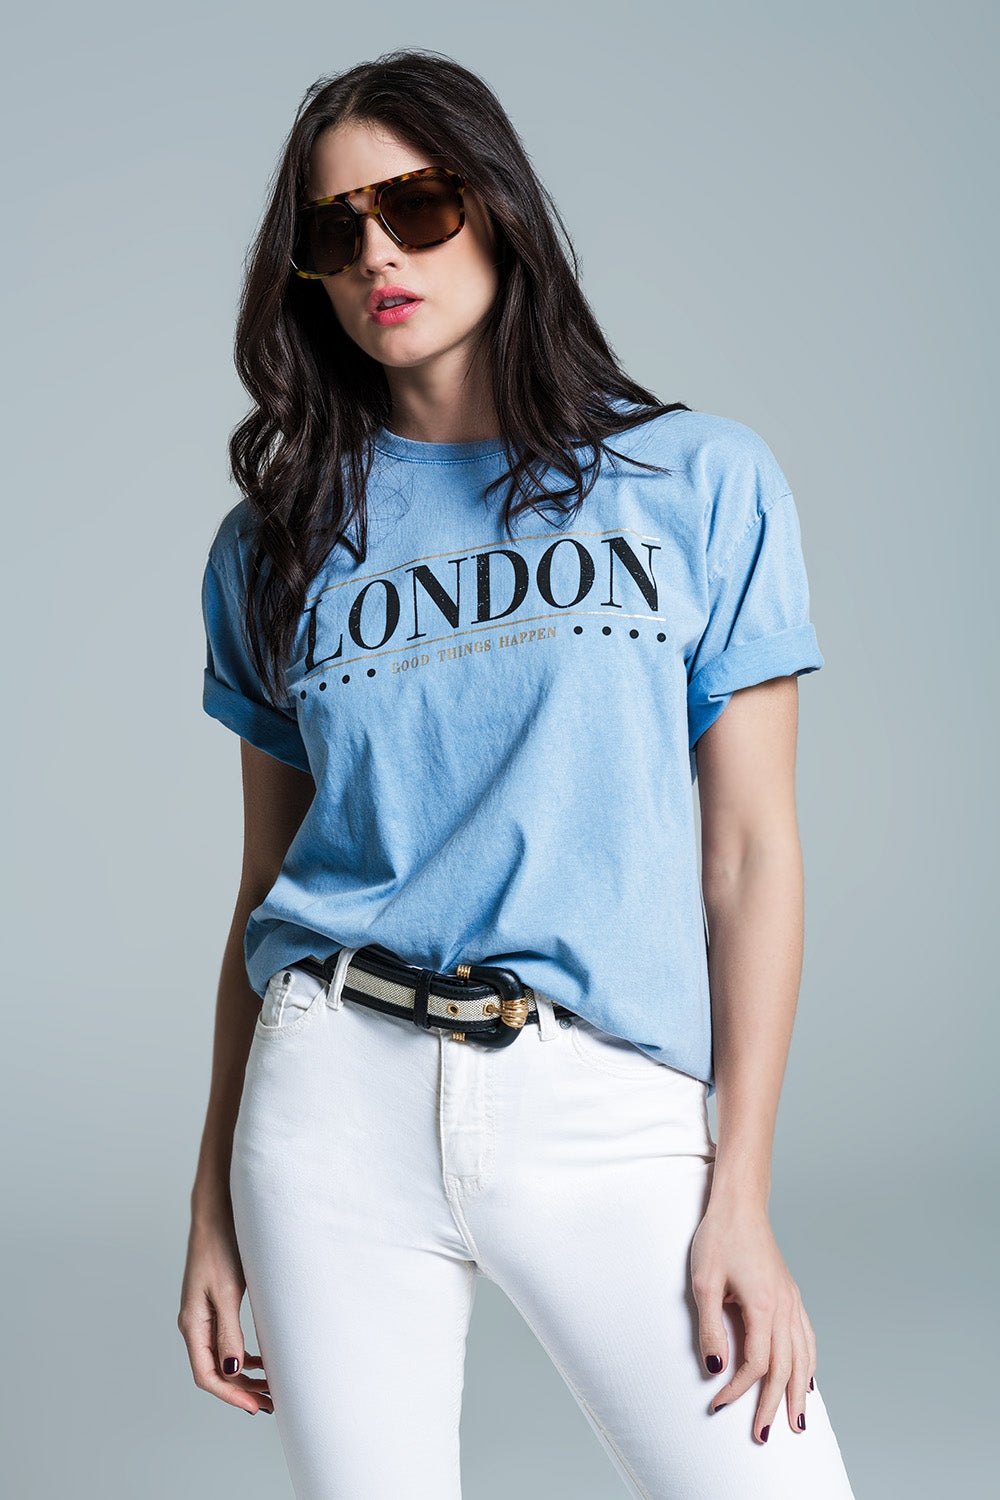 Q2 relaxed fit T-shirt in washed baby bue with london logo